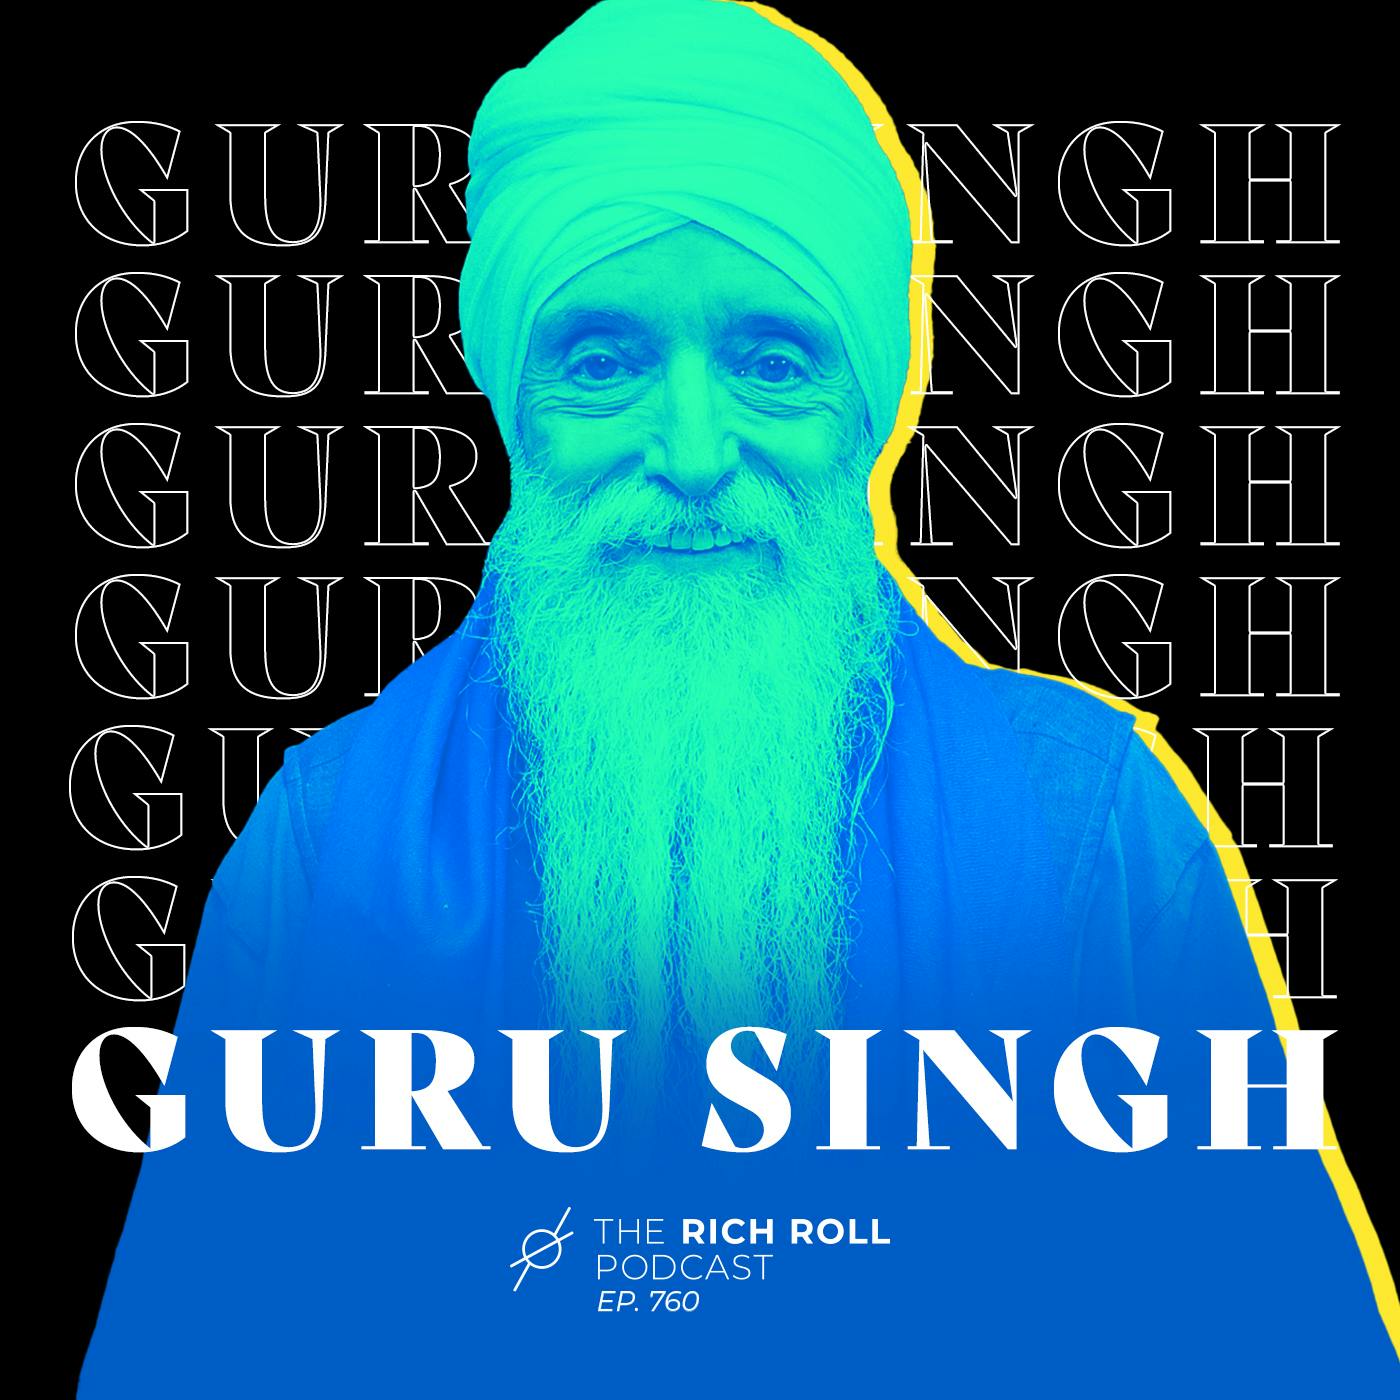 Guru Singh Is The Master Of Change: Spiritual Tools For Positive Self-Growth